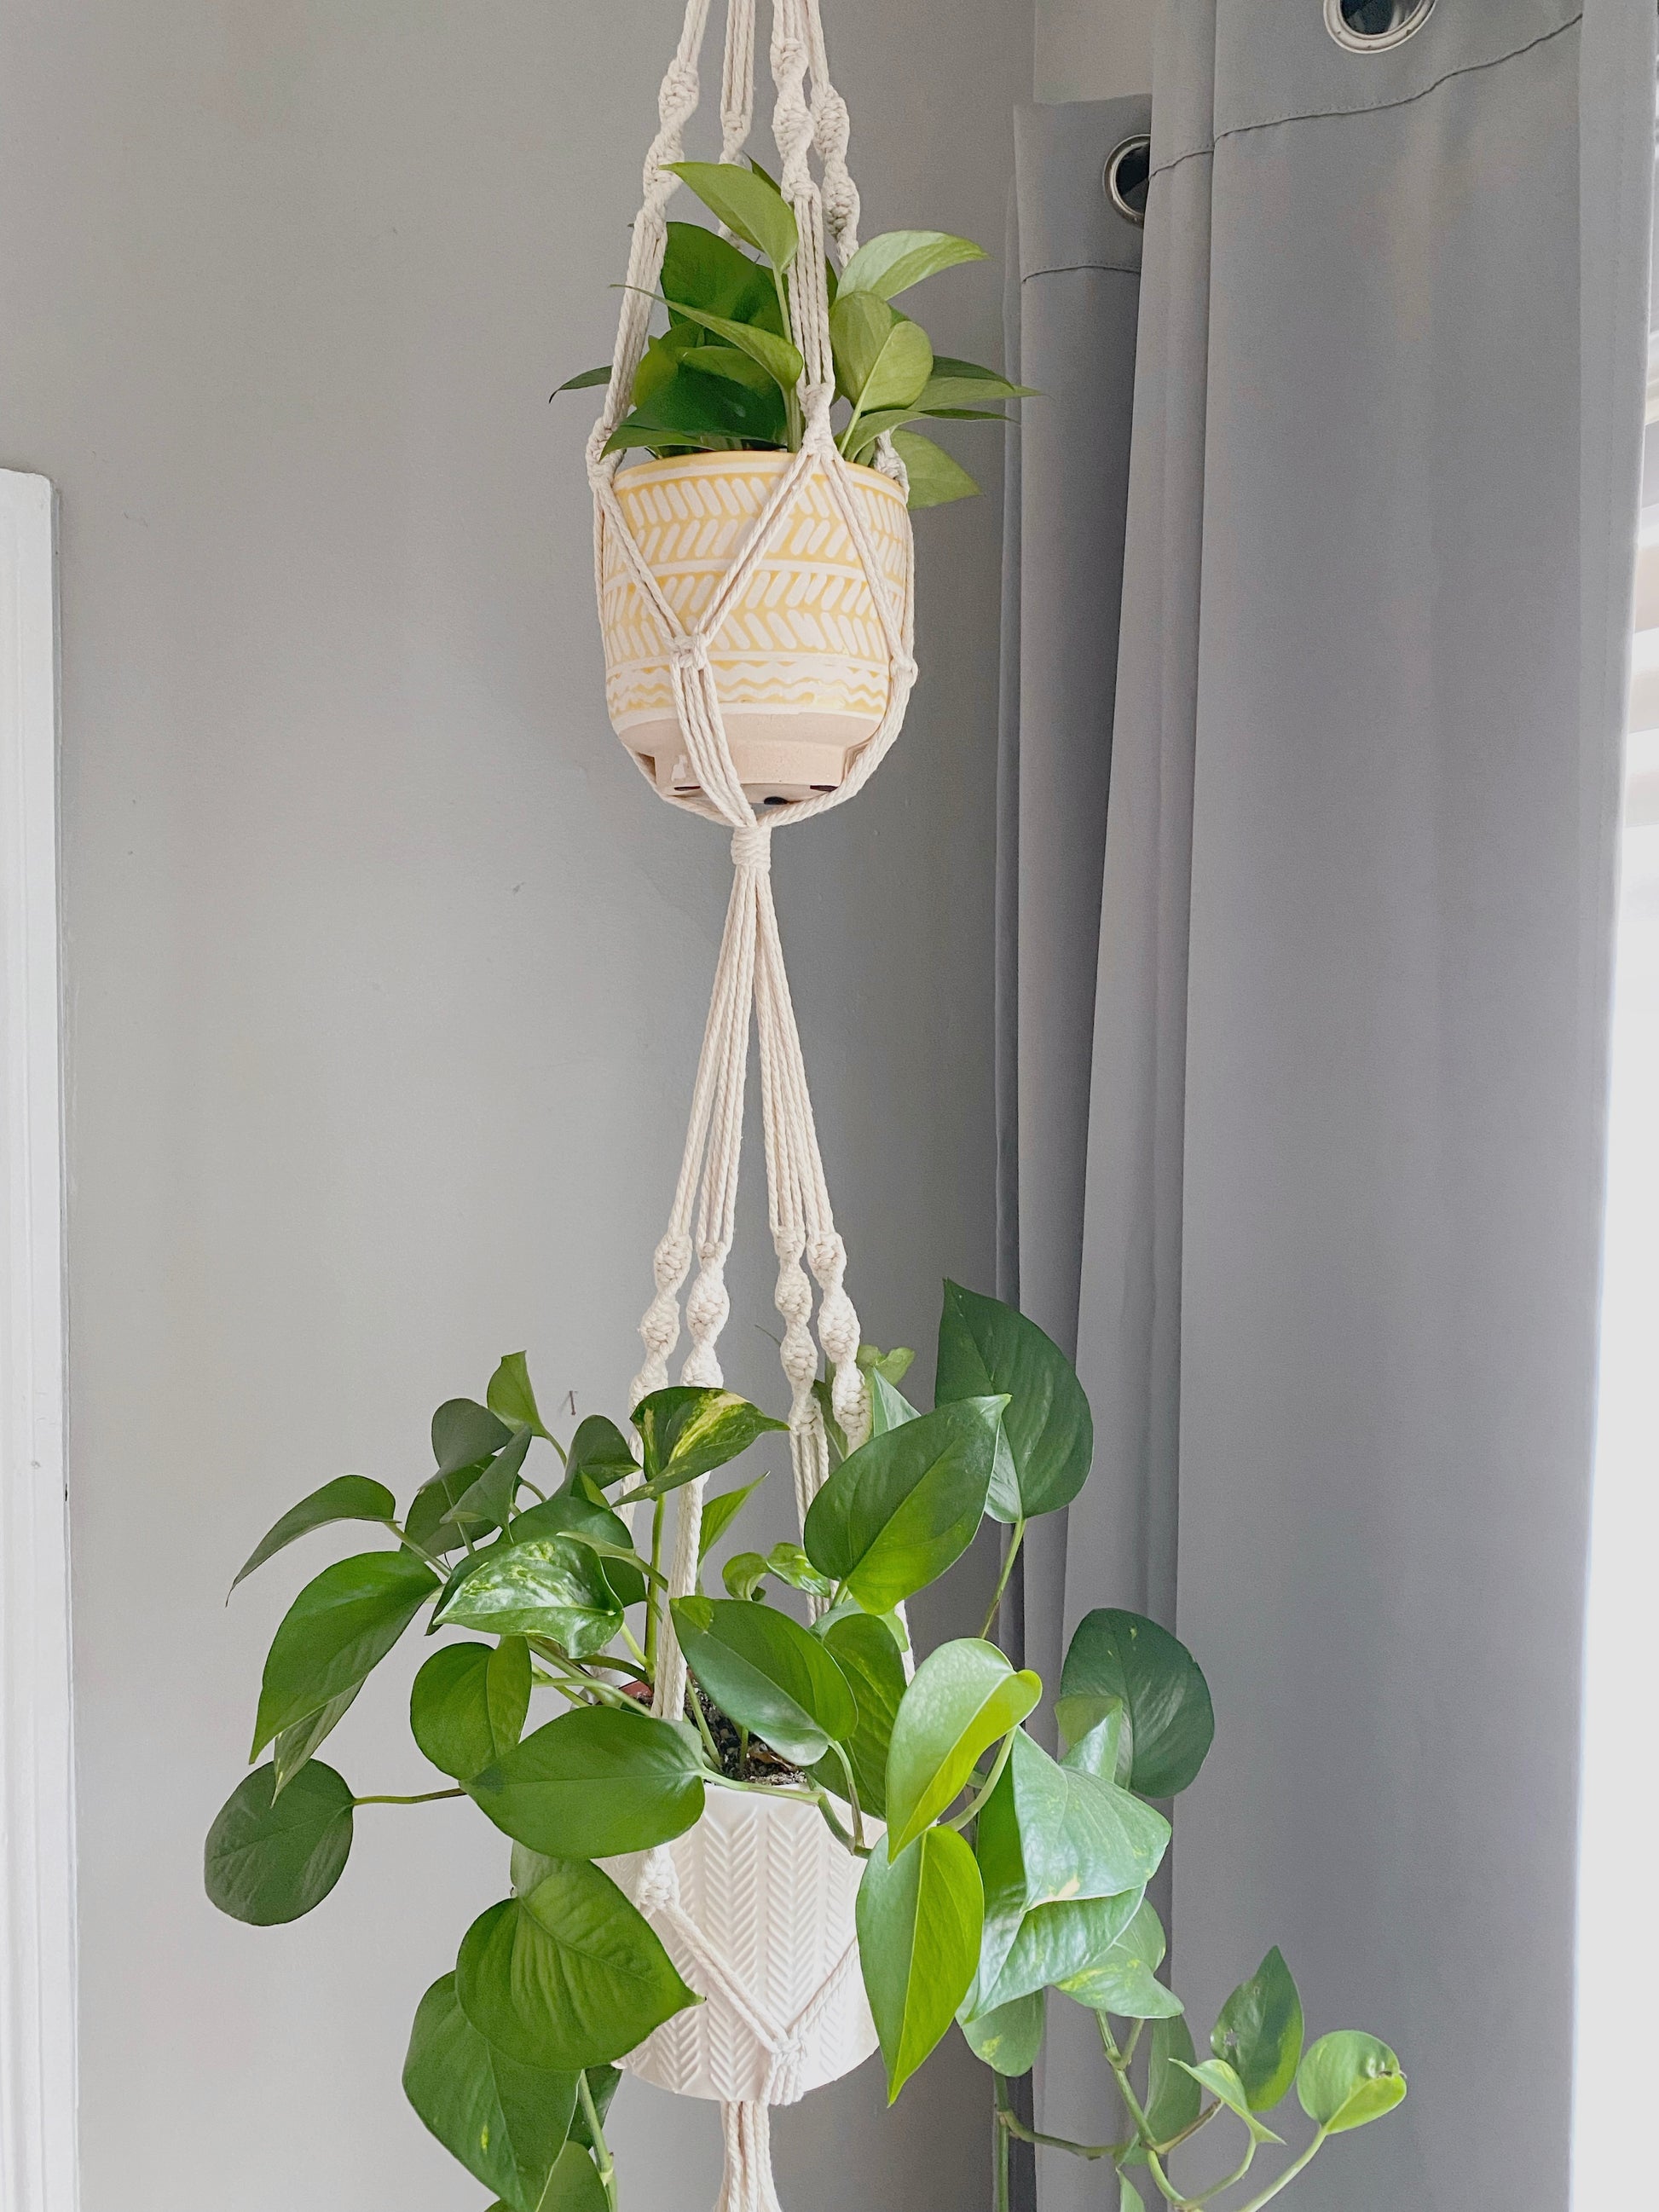 Create more space in your home and suspend your urban jungle with a ready to hang, handmade, boho double macrame plant hanger. This hanger is perfect for high ceilings! Great for indoors or outdoors, just add your favorite plants!